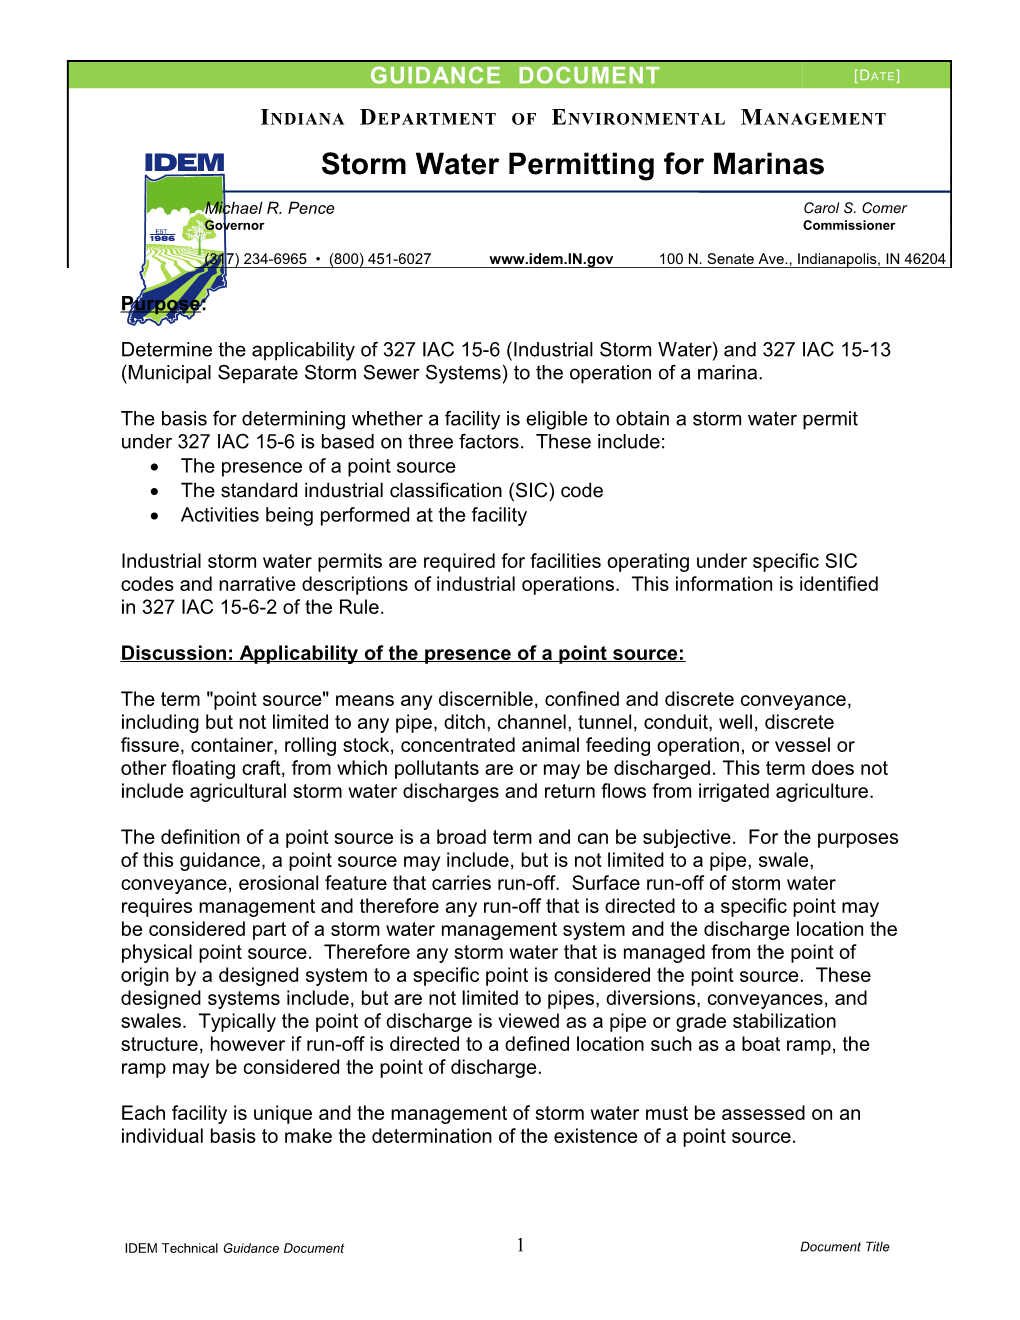 The Basis for Determining Whether a Facility Is Eligible to Obtain a Storm Water Permit